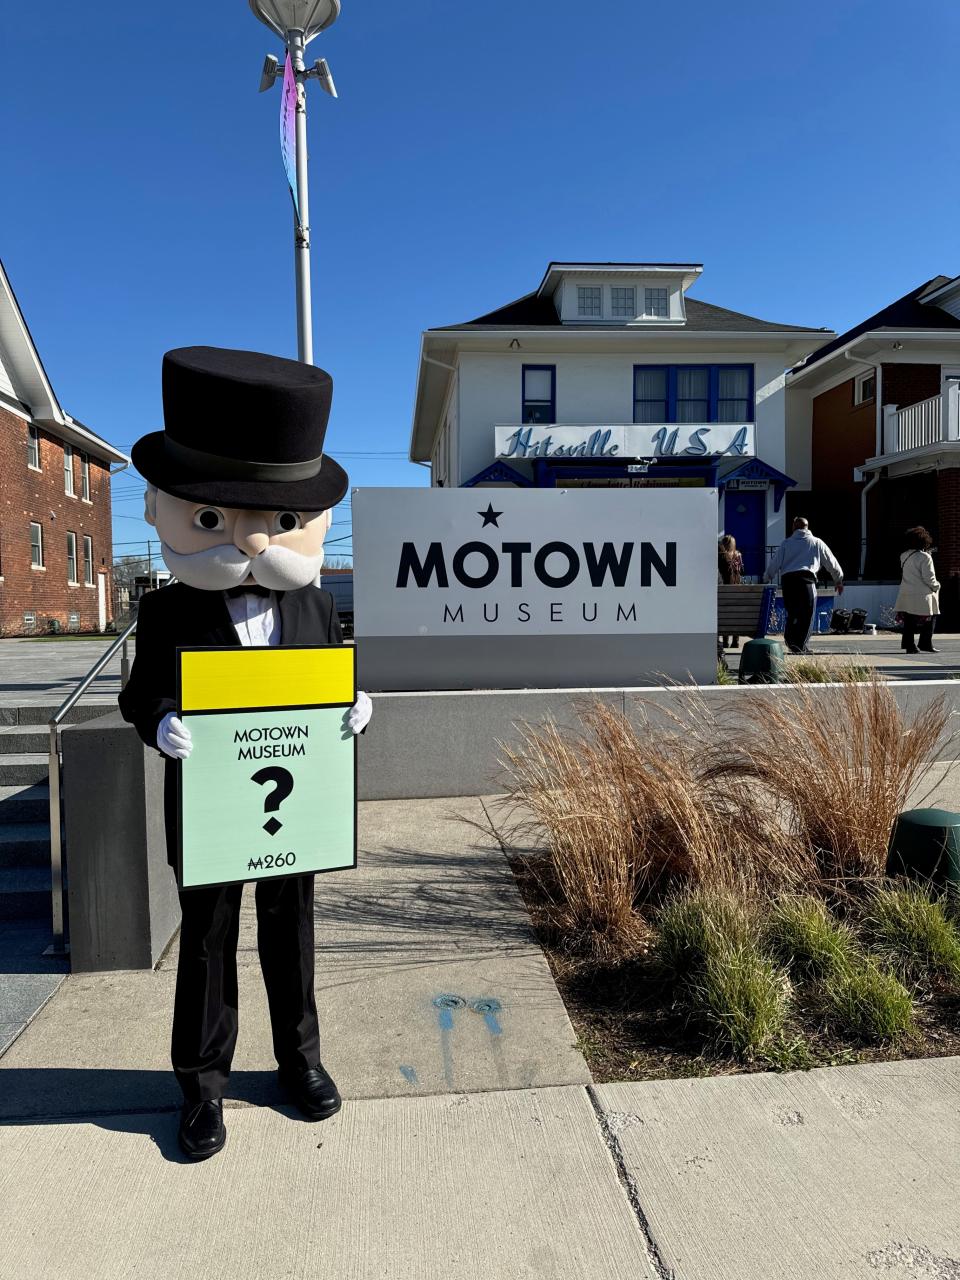 A picture of the Monopoly board game mascot Milburn Pennybags posing in front of Detroit's Motown Museum as Hasbro plans its Detroit Edition Monopoly.